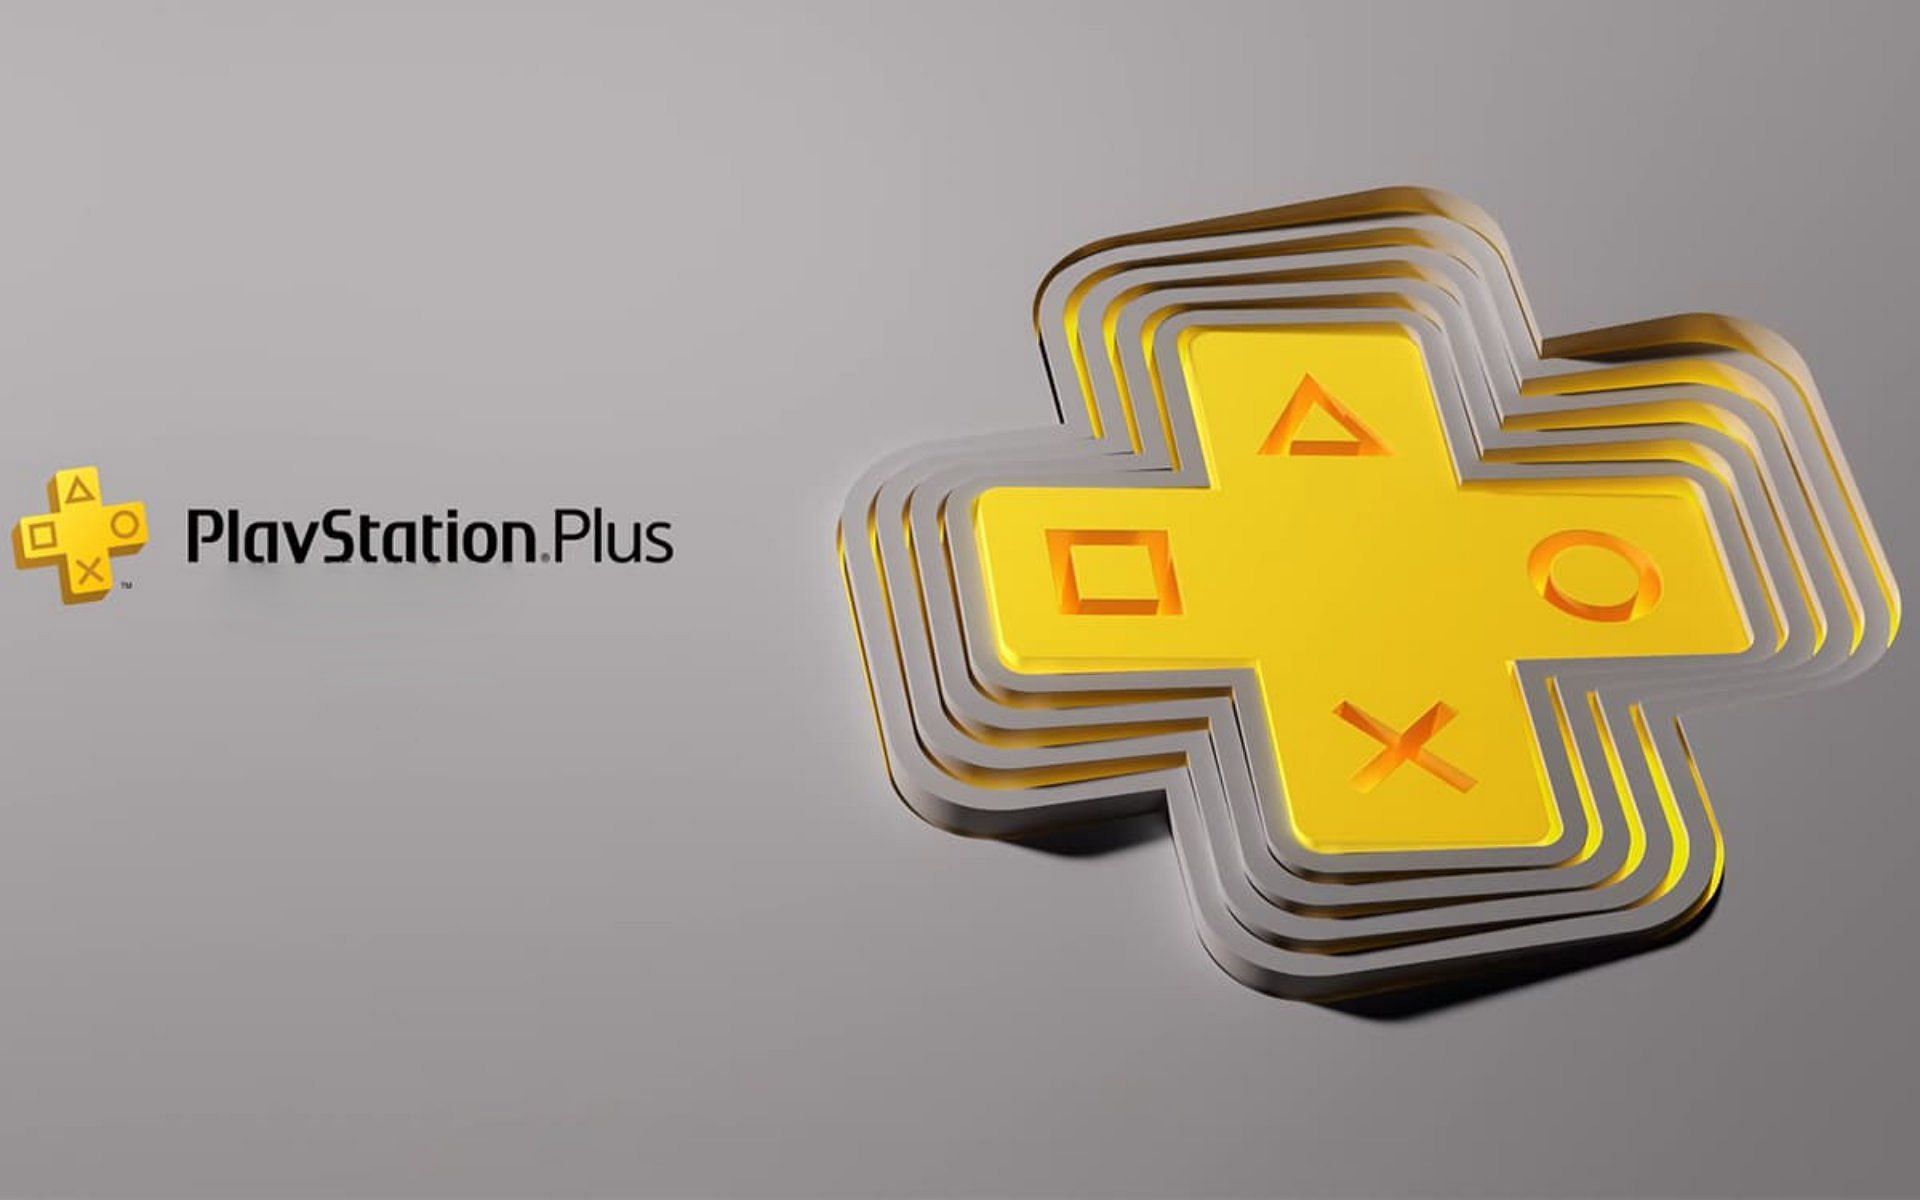 The new PS Plus is expected to launch in India around May 23, 2022 (Images by Sony)